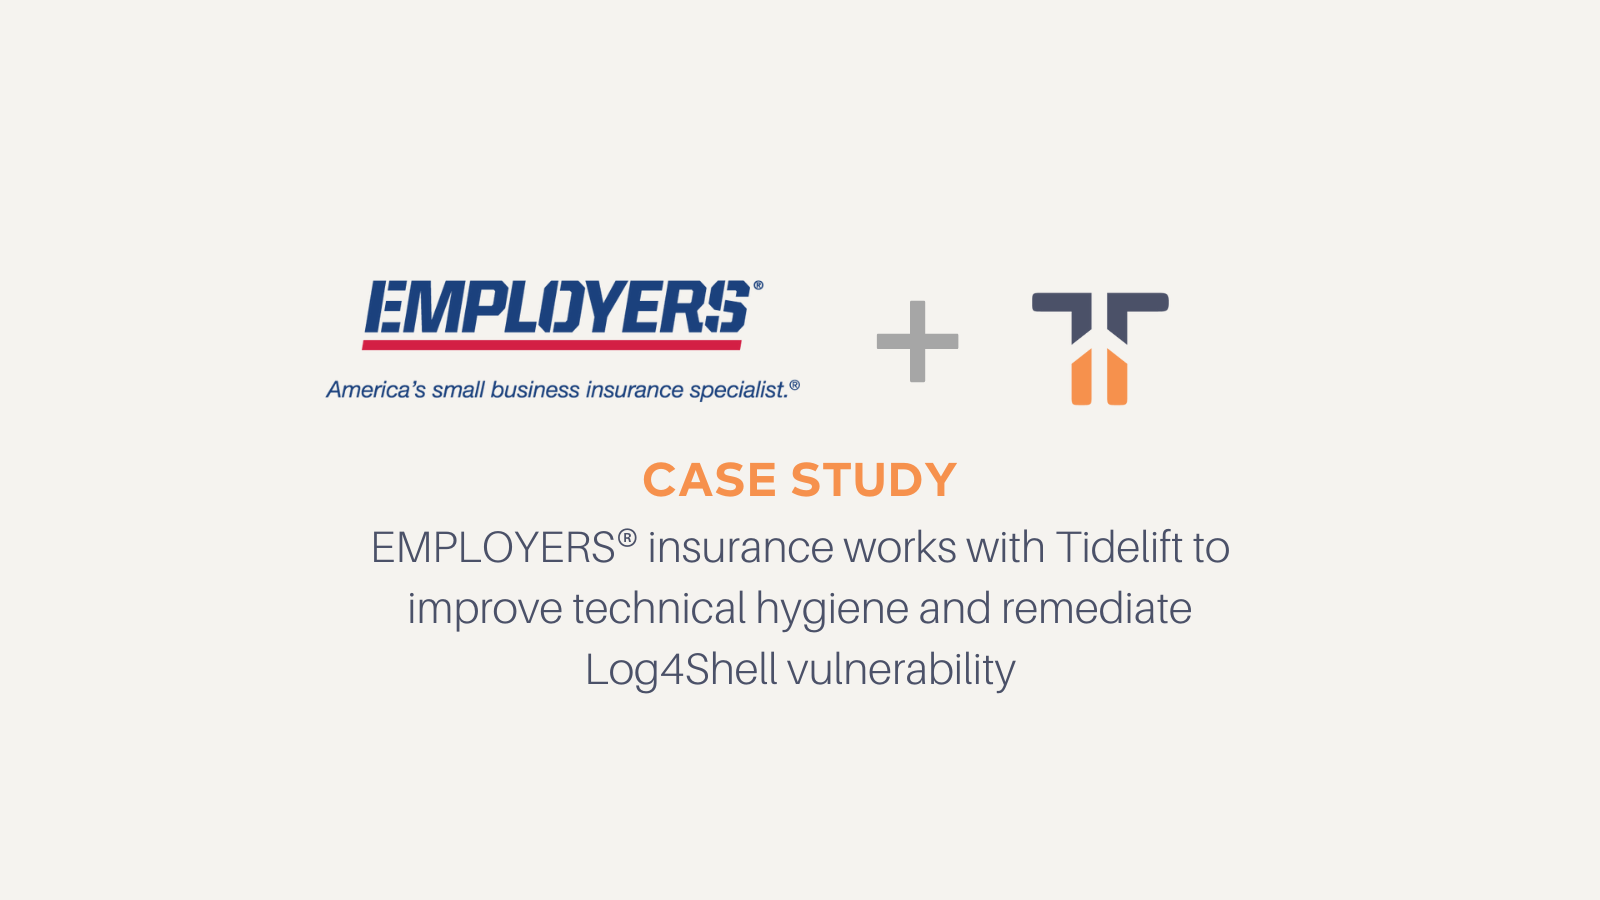 Case story: EMPLOYERS® insurance works with Tidelift to improve technical hygiene and remediate Log4Shell vulnerability